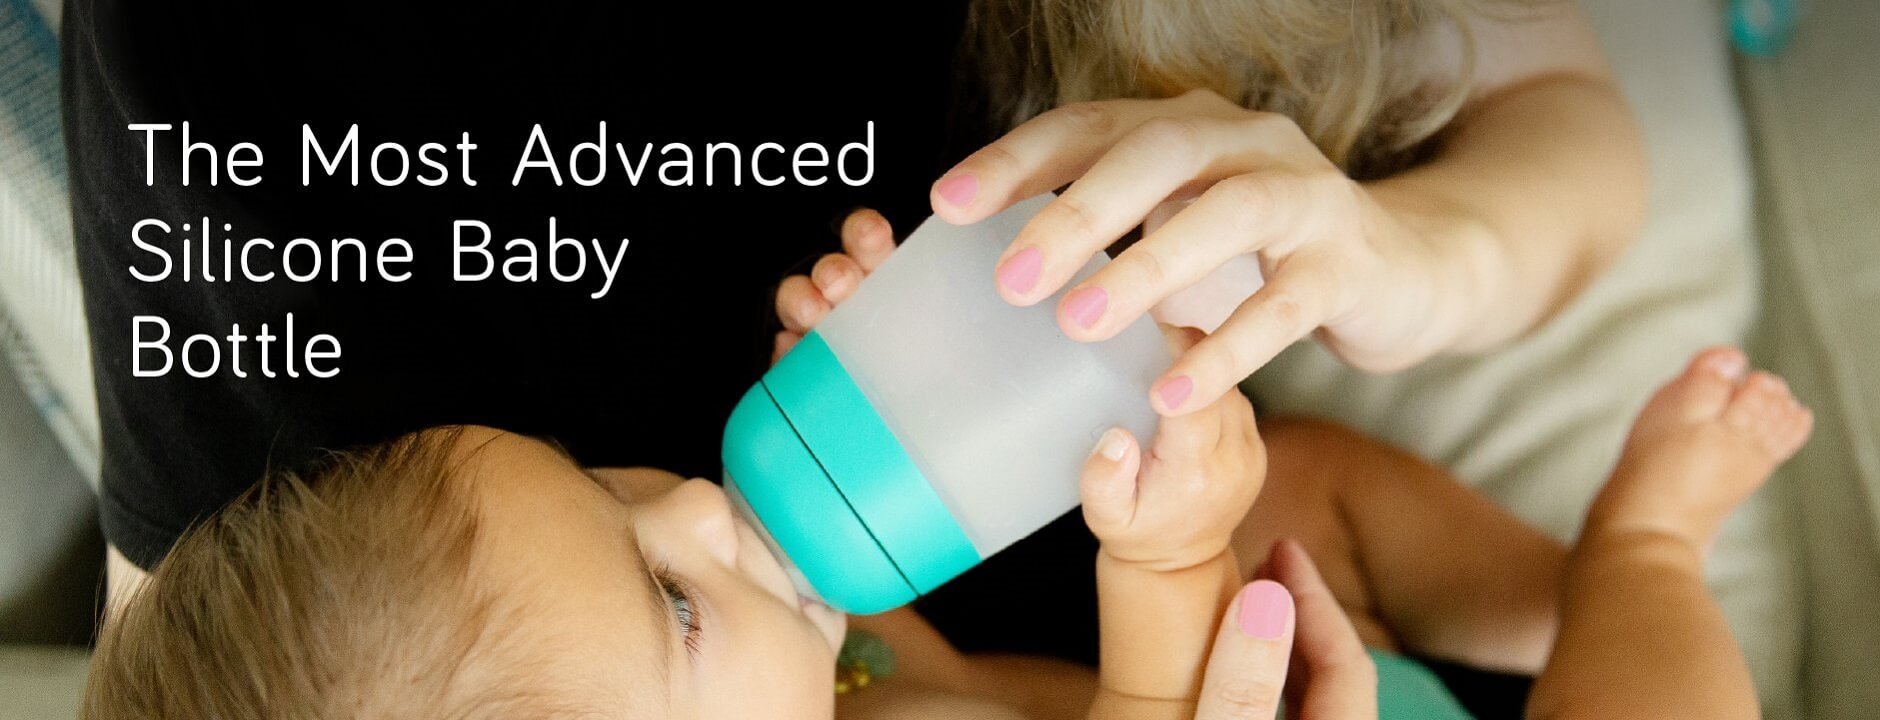 The Most Advanced Silicone Baby Bottle - baby nursing with the Nanobébé Flexy Silicone Baby Bottle